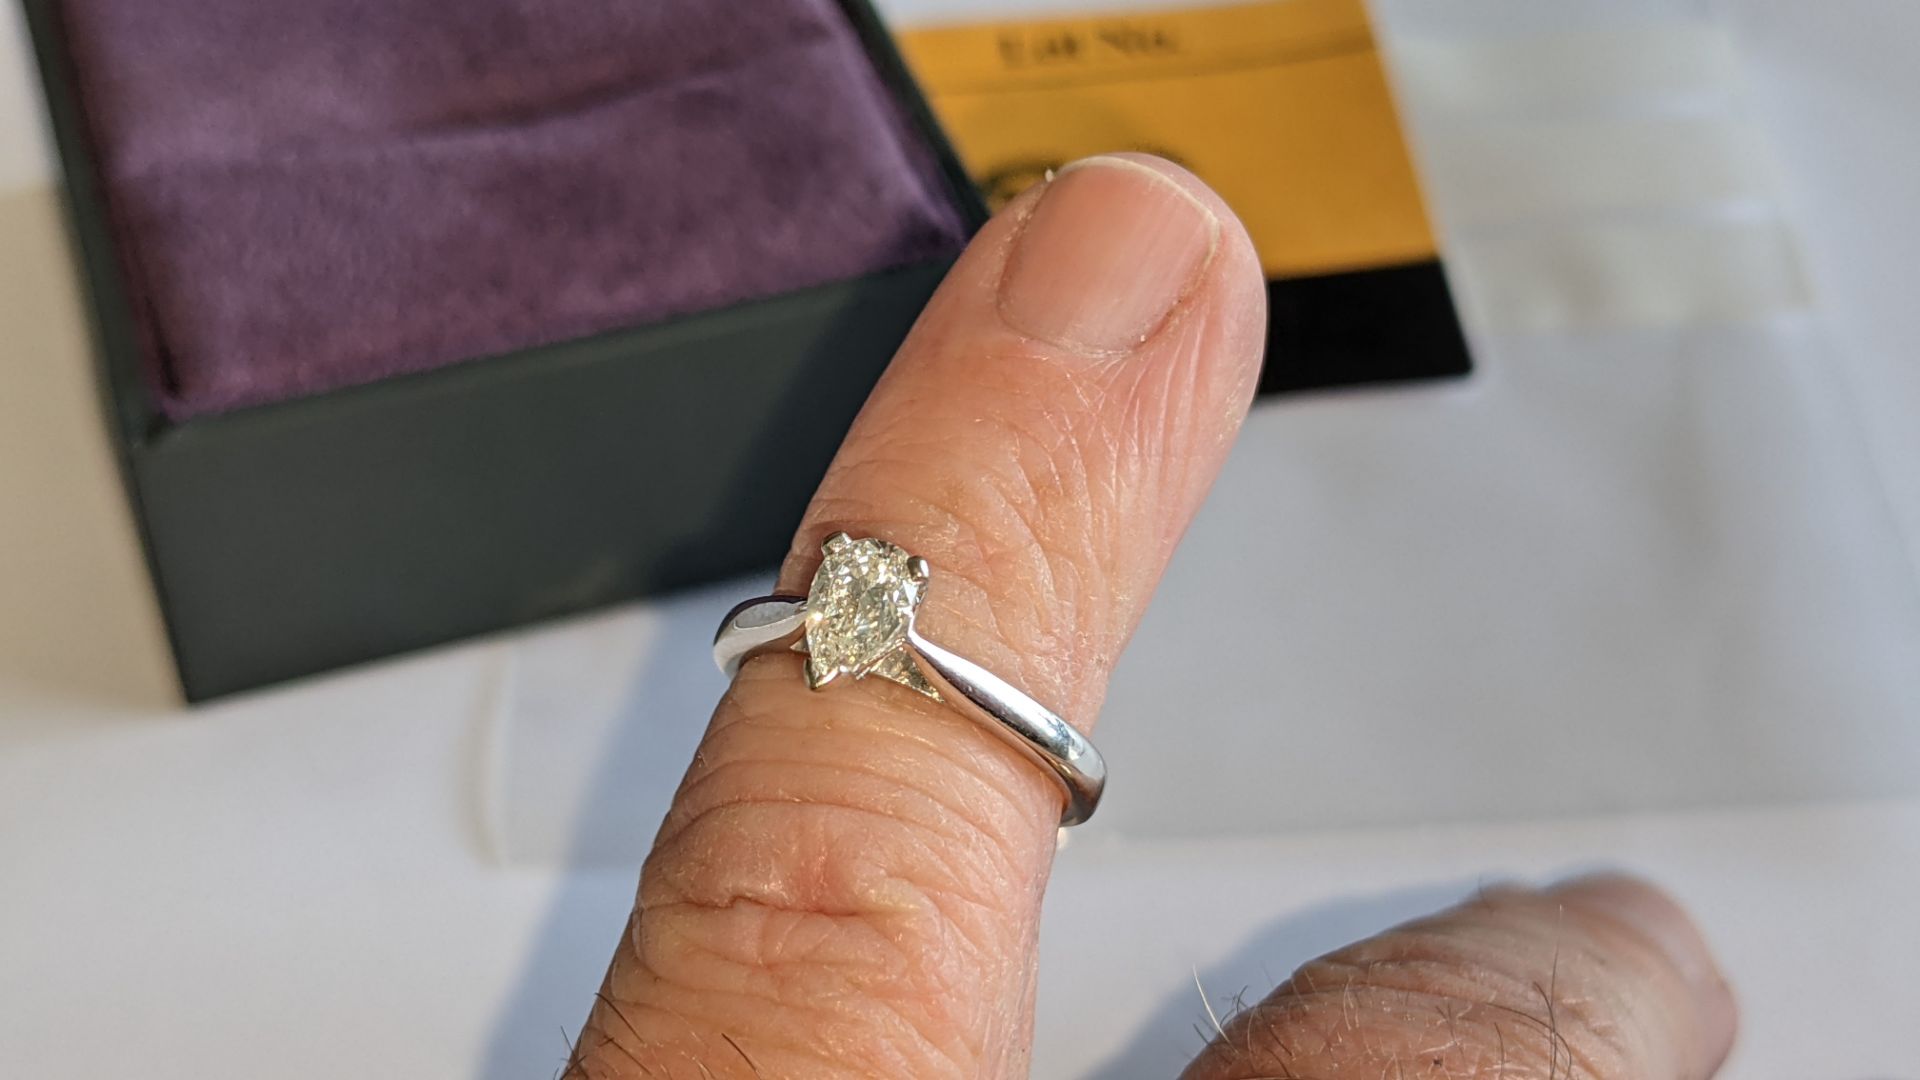 18ct white gold & diamond ring with 0.50ct pear shaped diamond. RRP £2,200 - Image 13 of 16